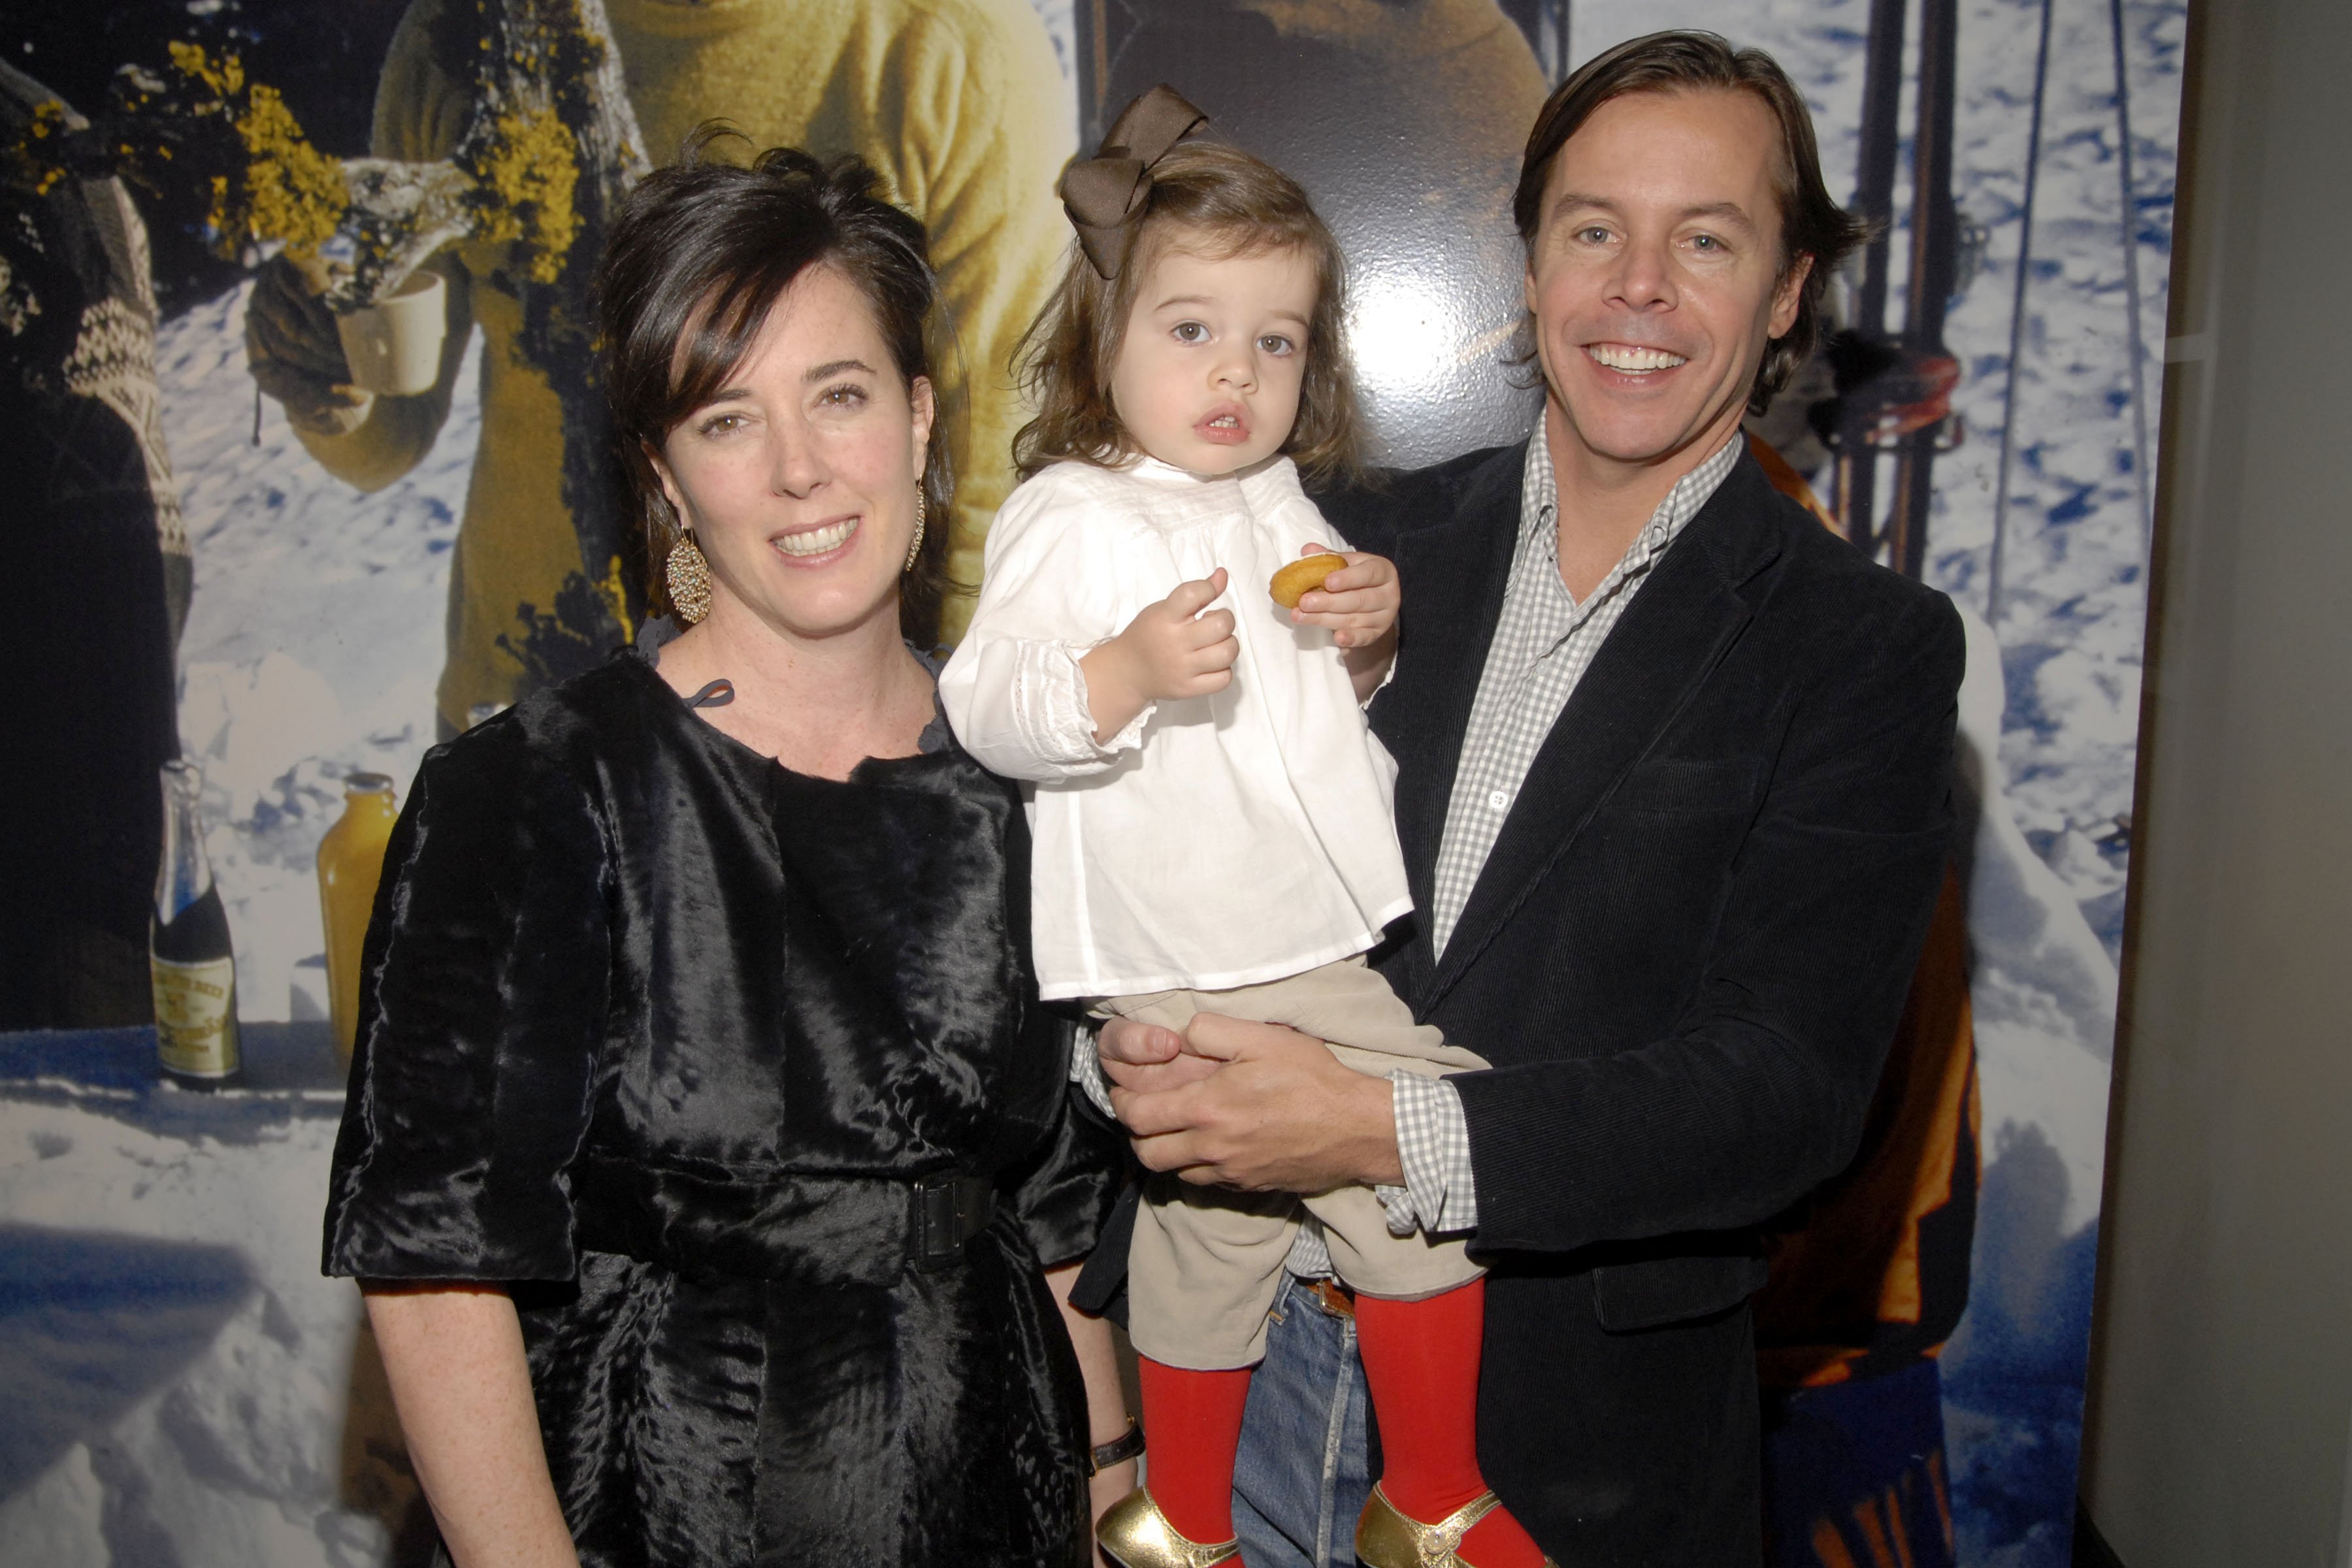 Who Is Frances Beatrix Spade, Kate Spade's Daughter? Facts about Her